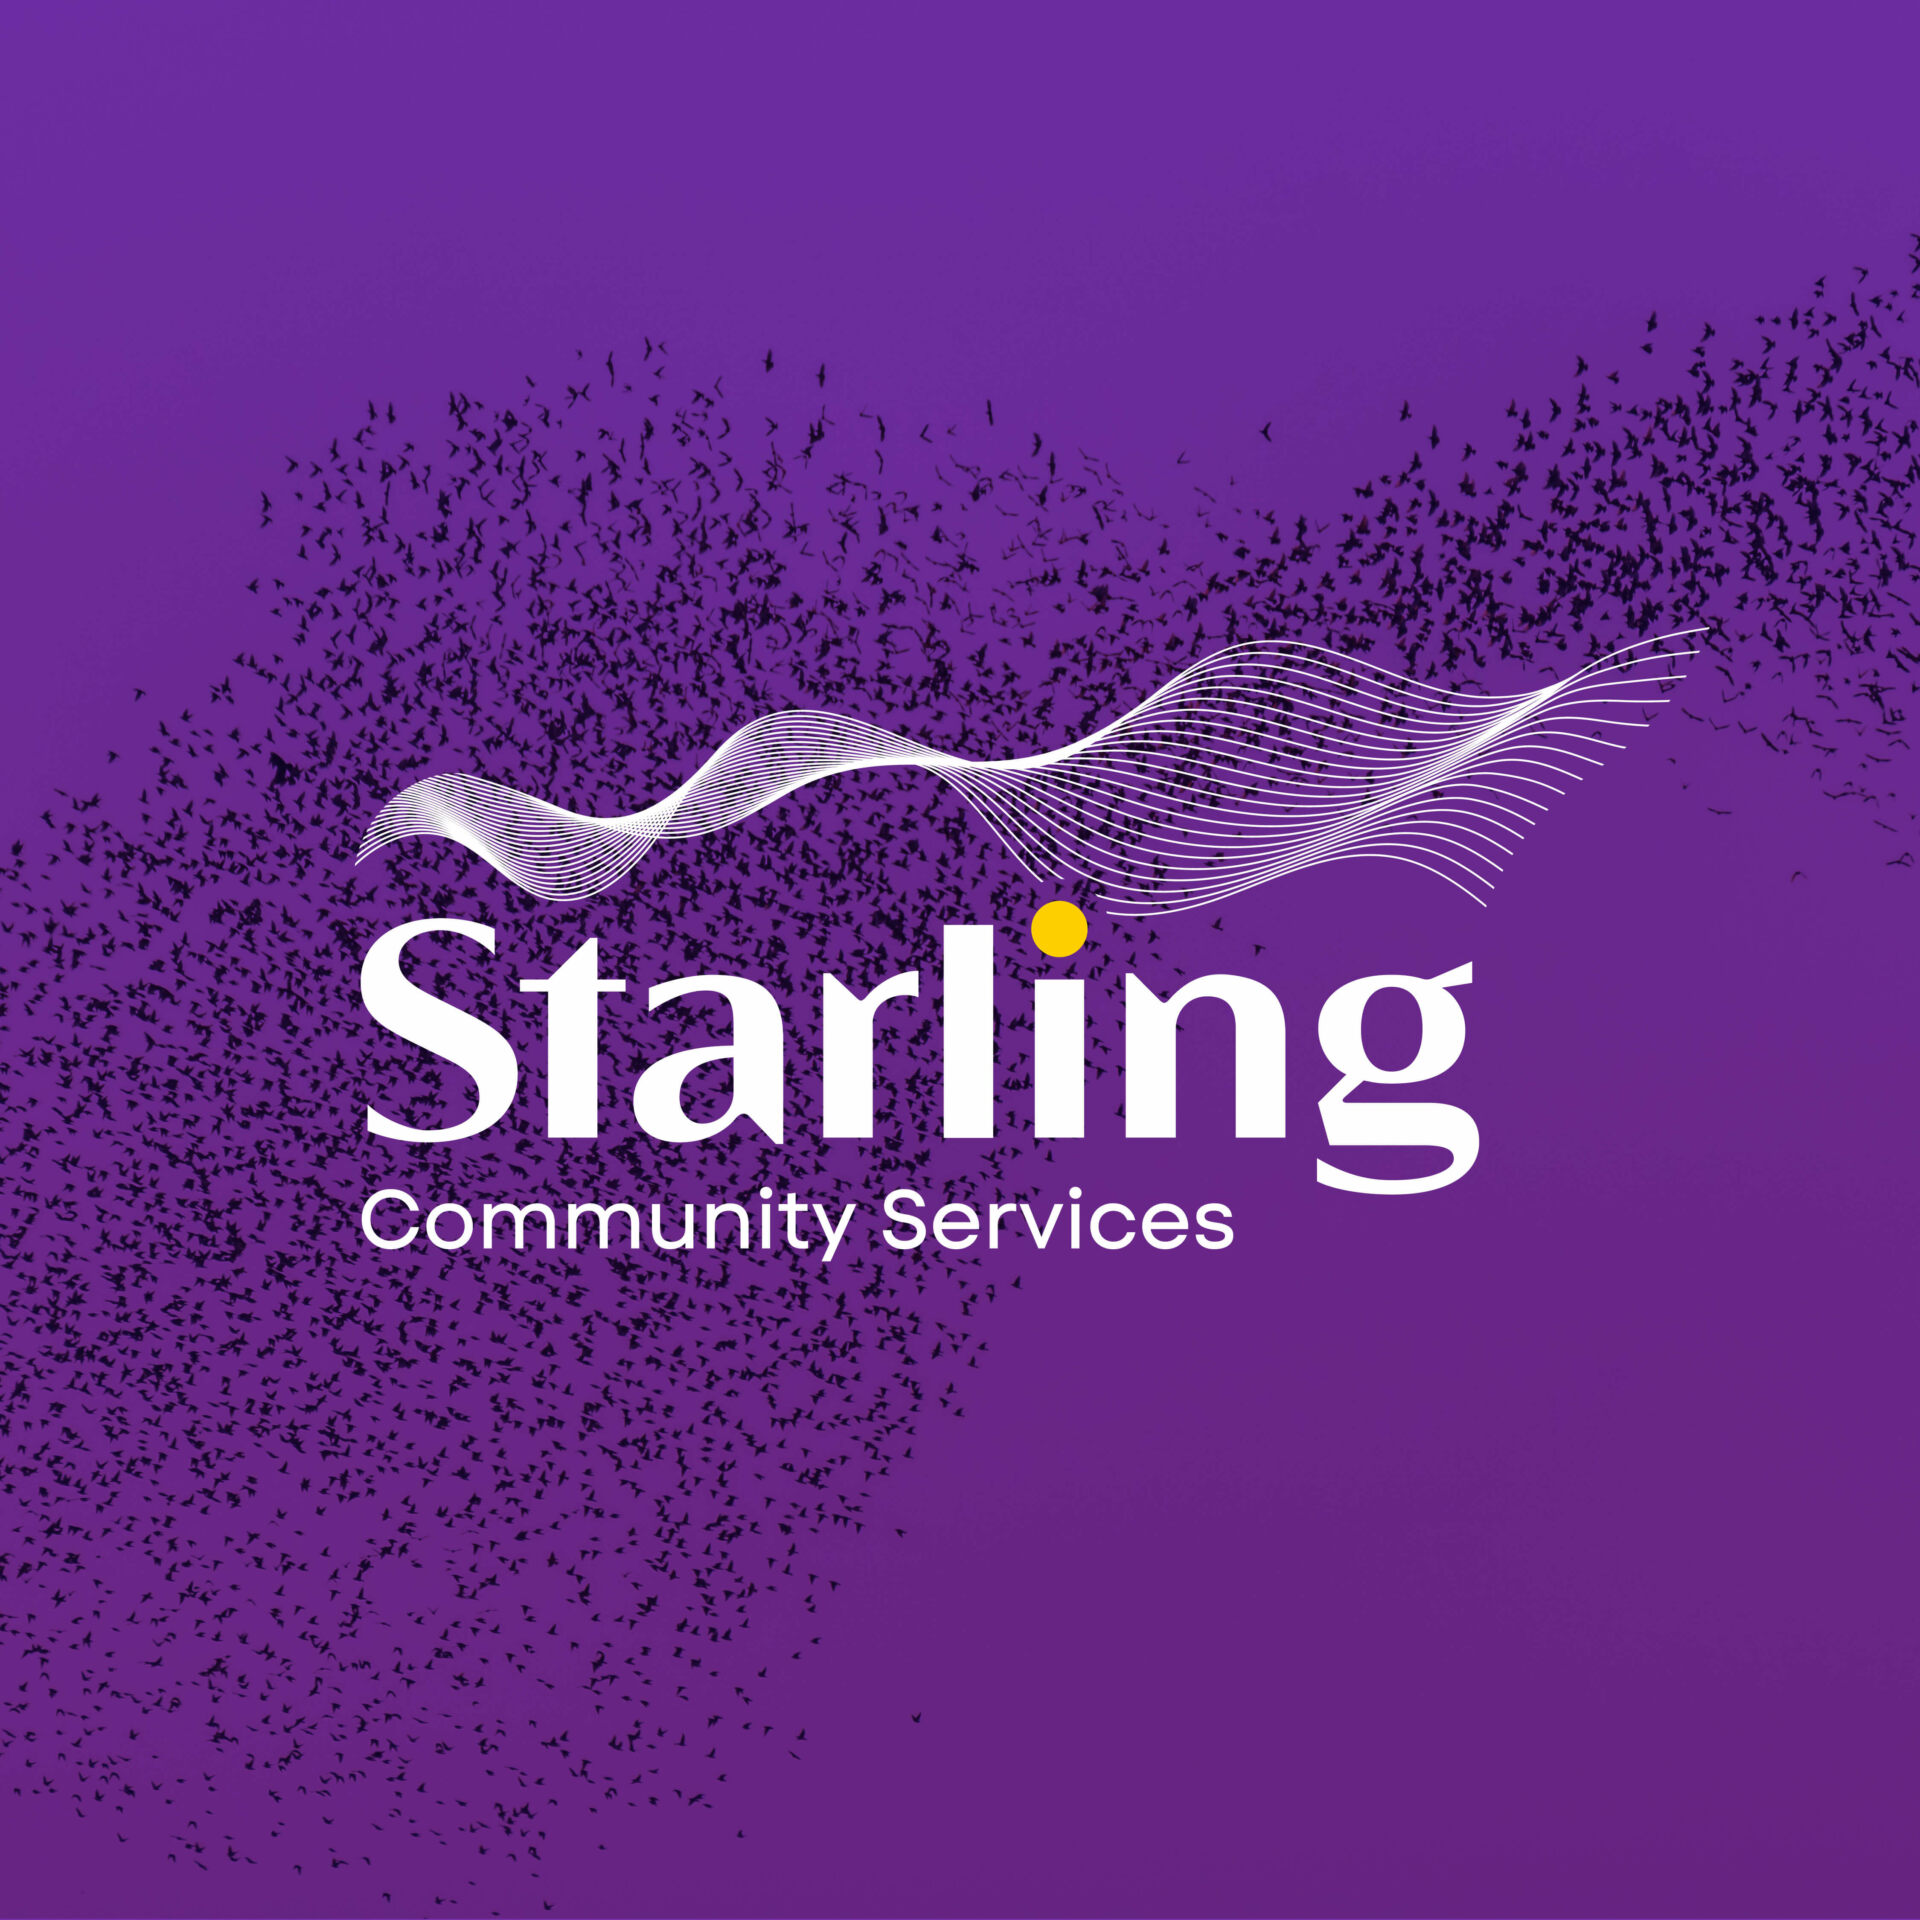 Starling Community Services